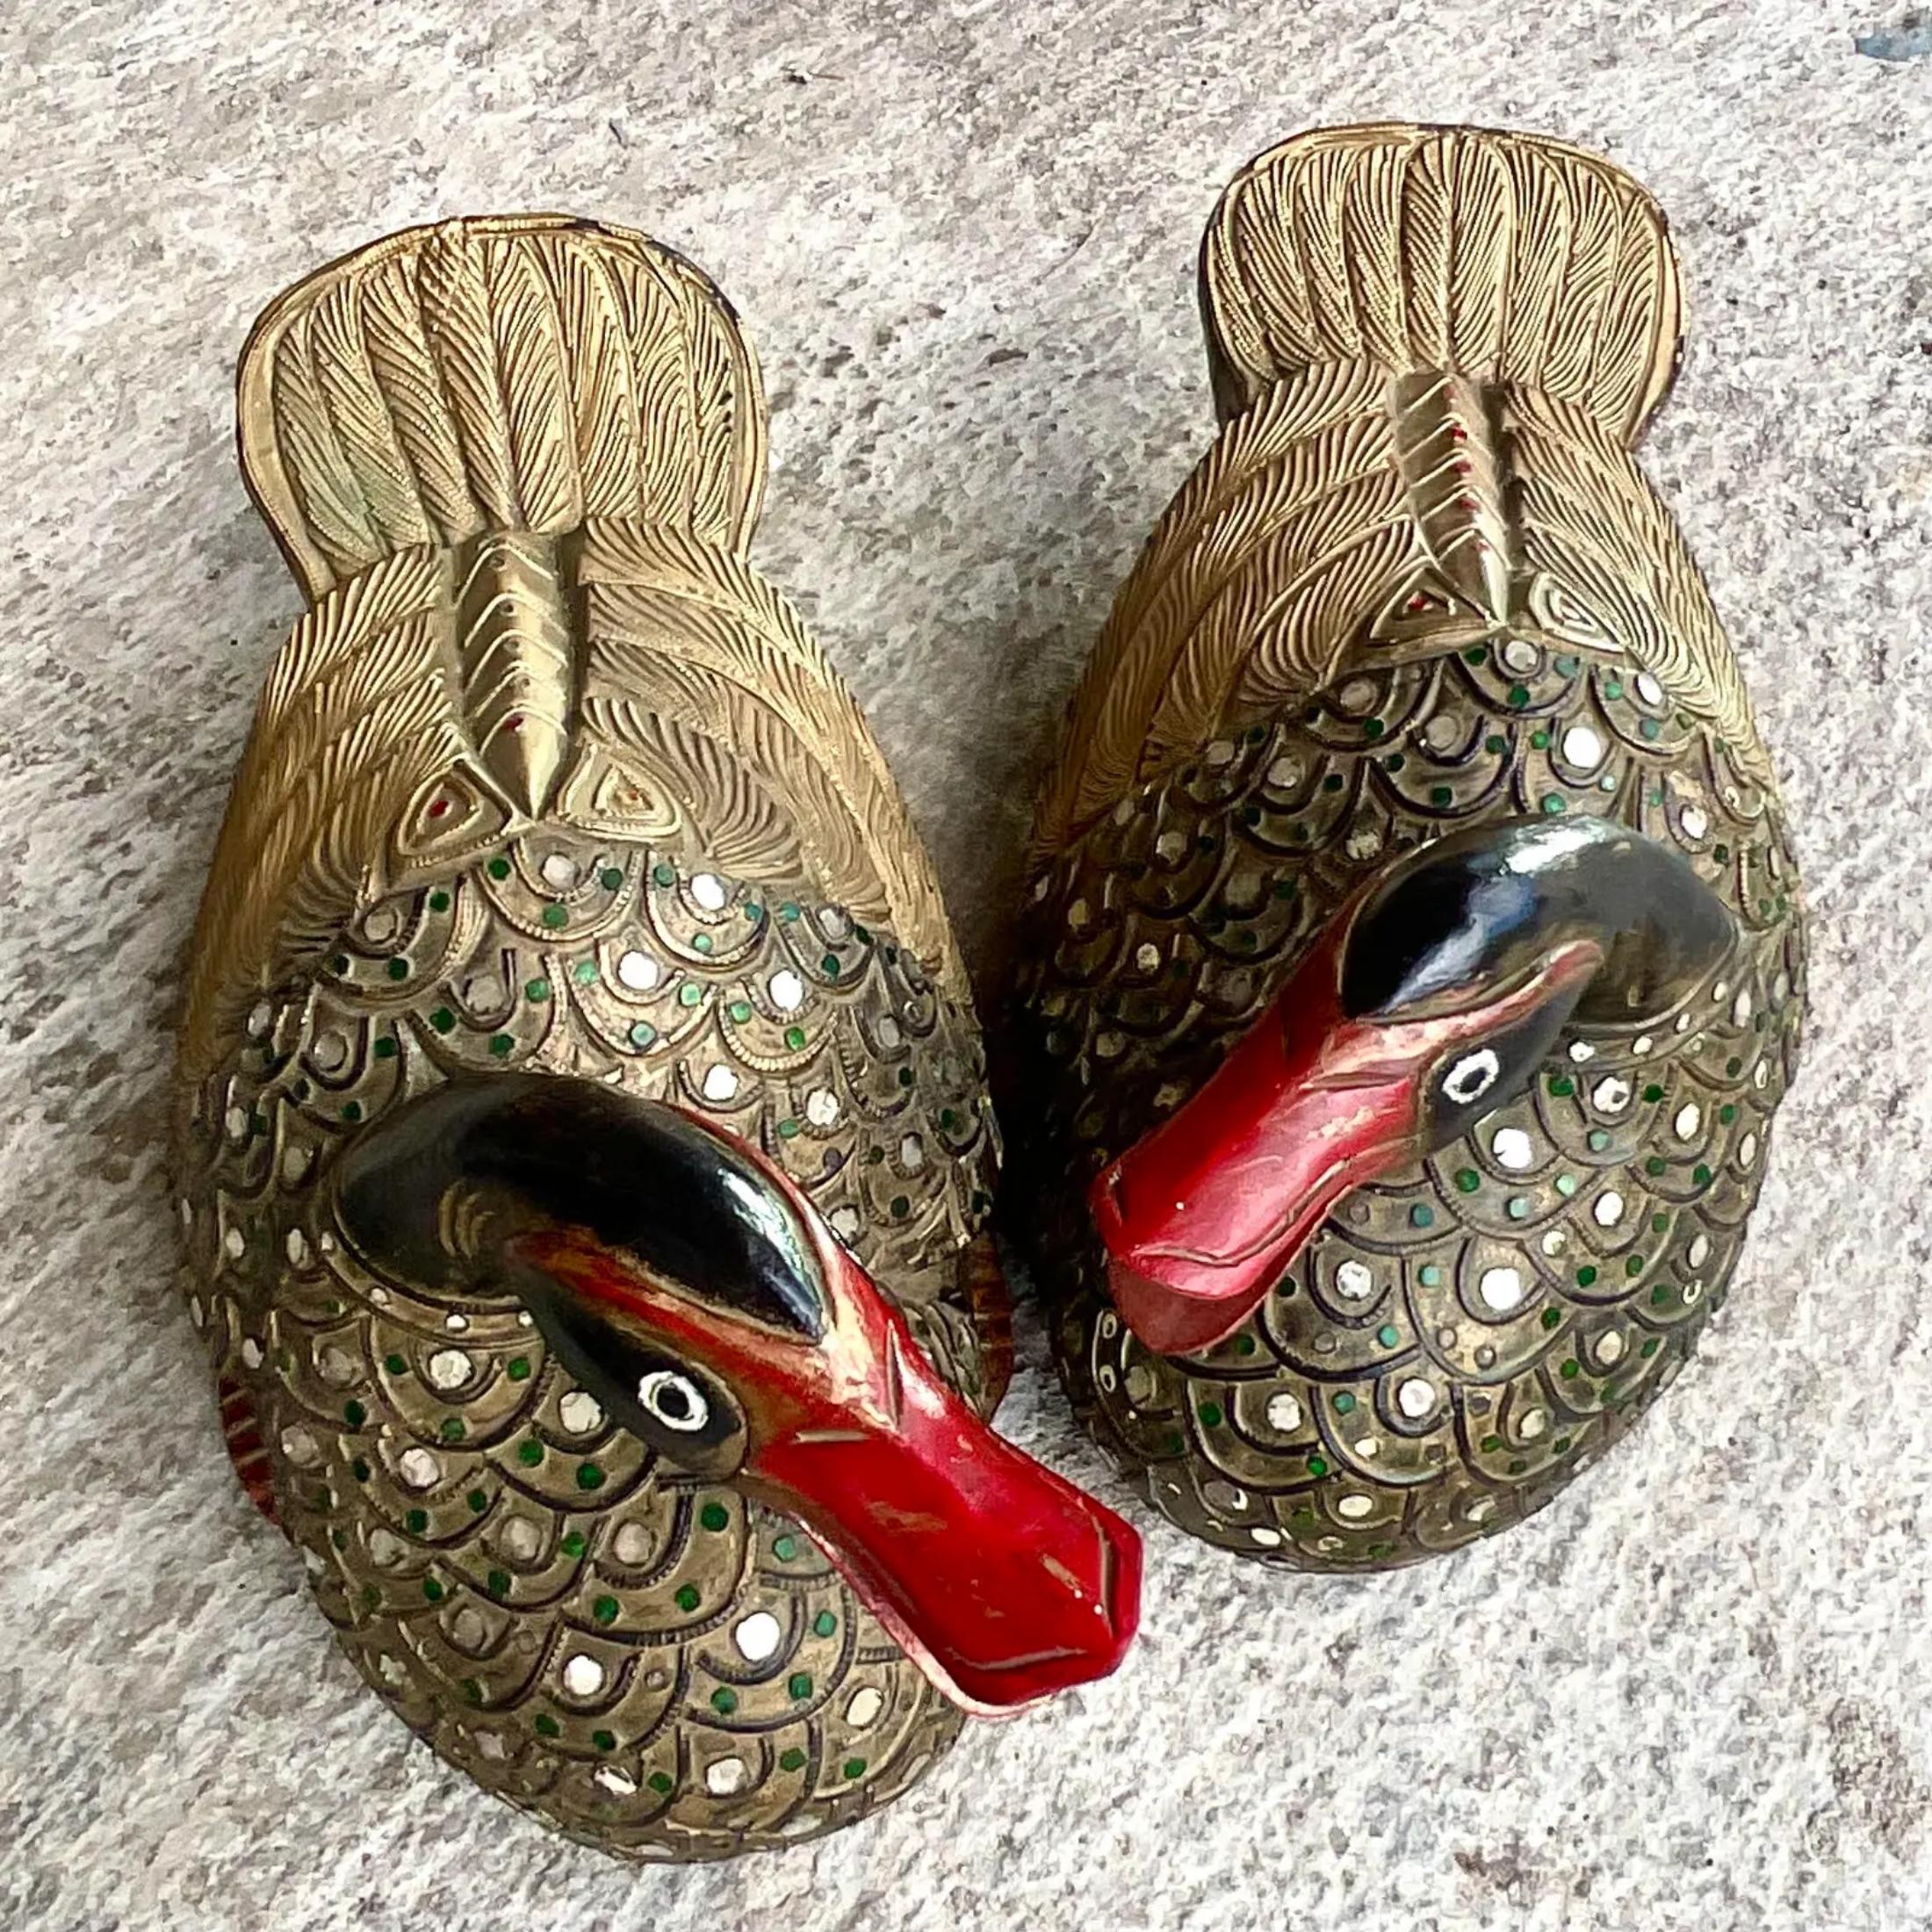 A fabulous pair of vintage Boho ducks. Chic hand carved detail with beautiful gilt detail. Little sparkling touches among the feathers. Acquired from a Palm Beach estate